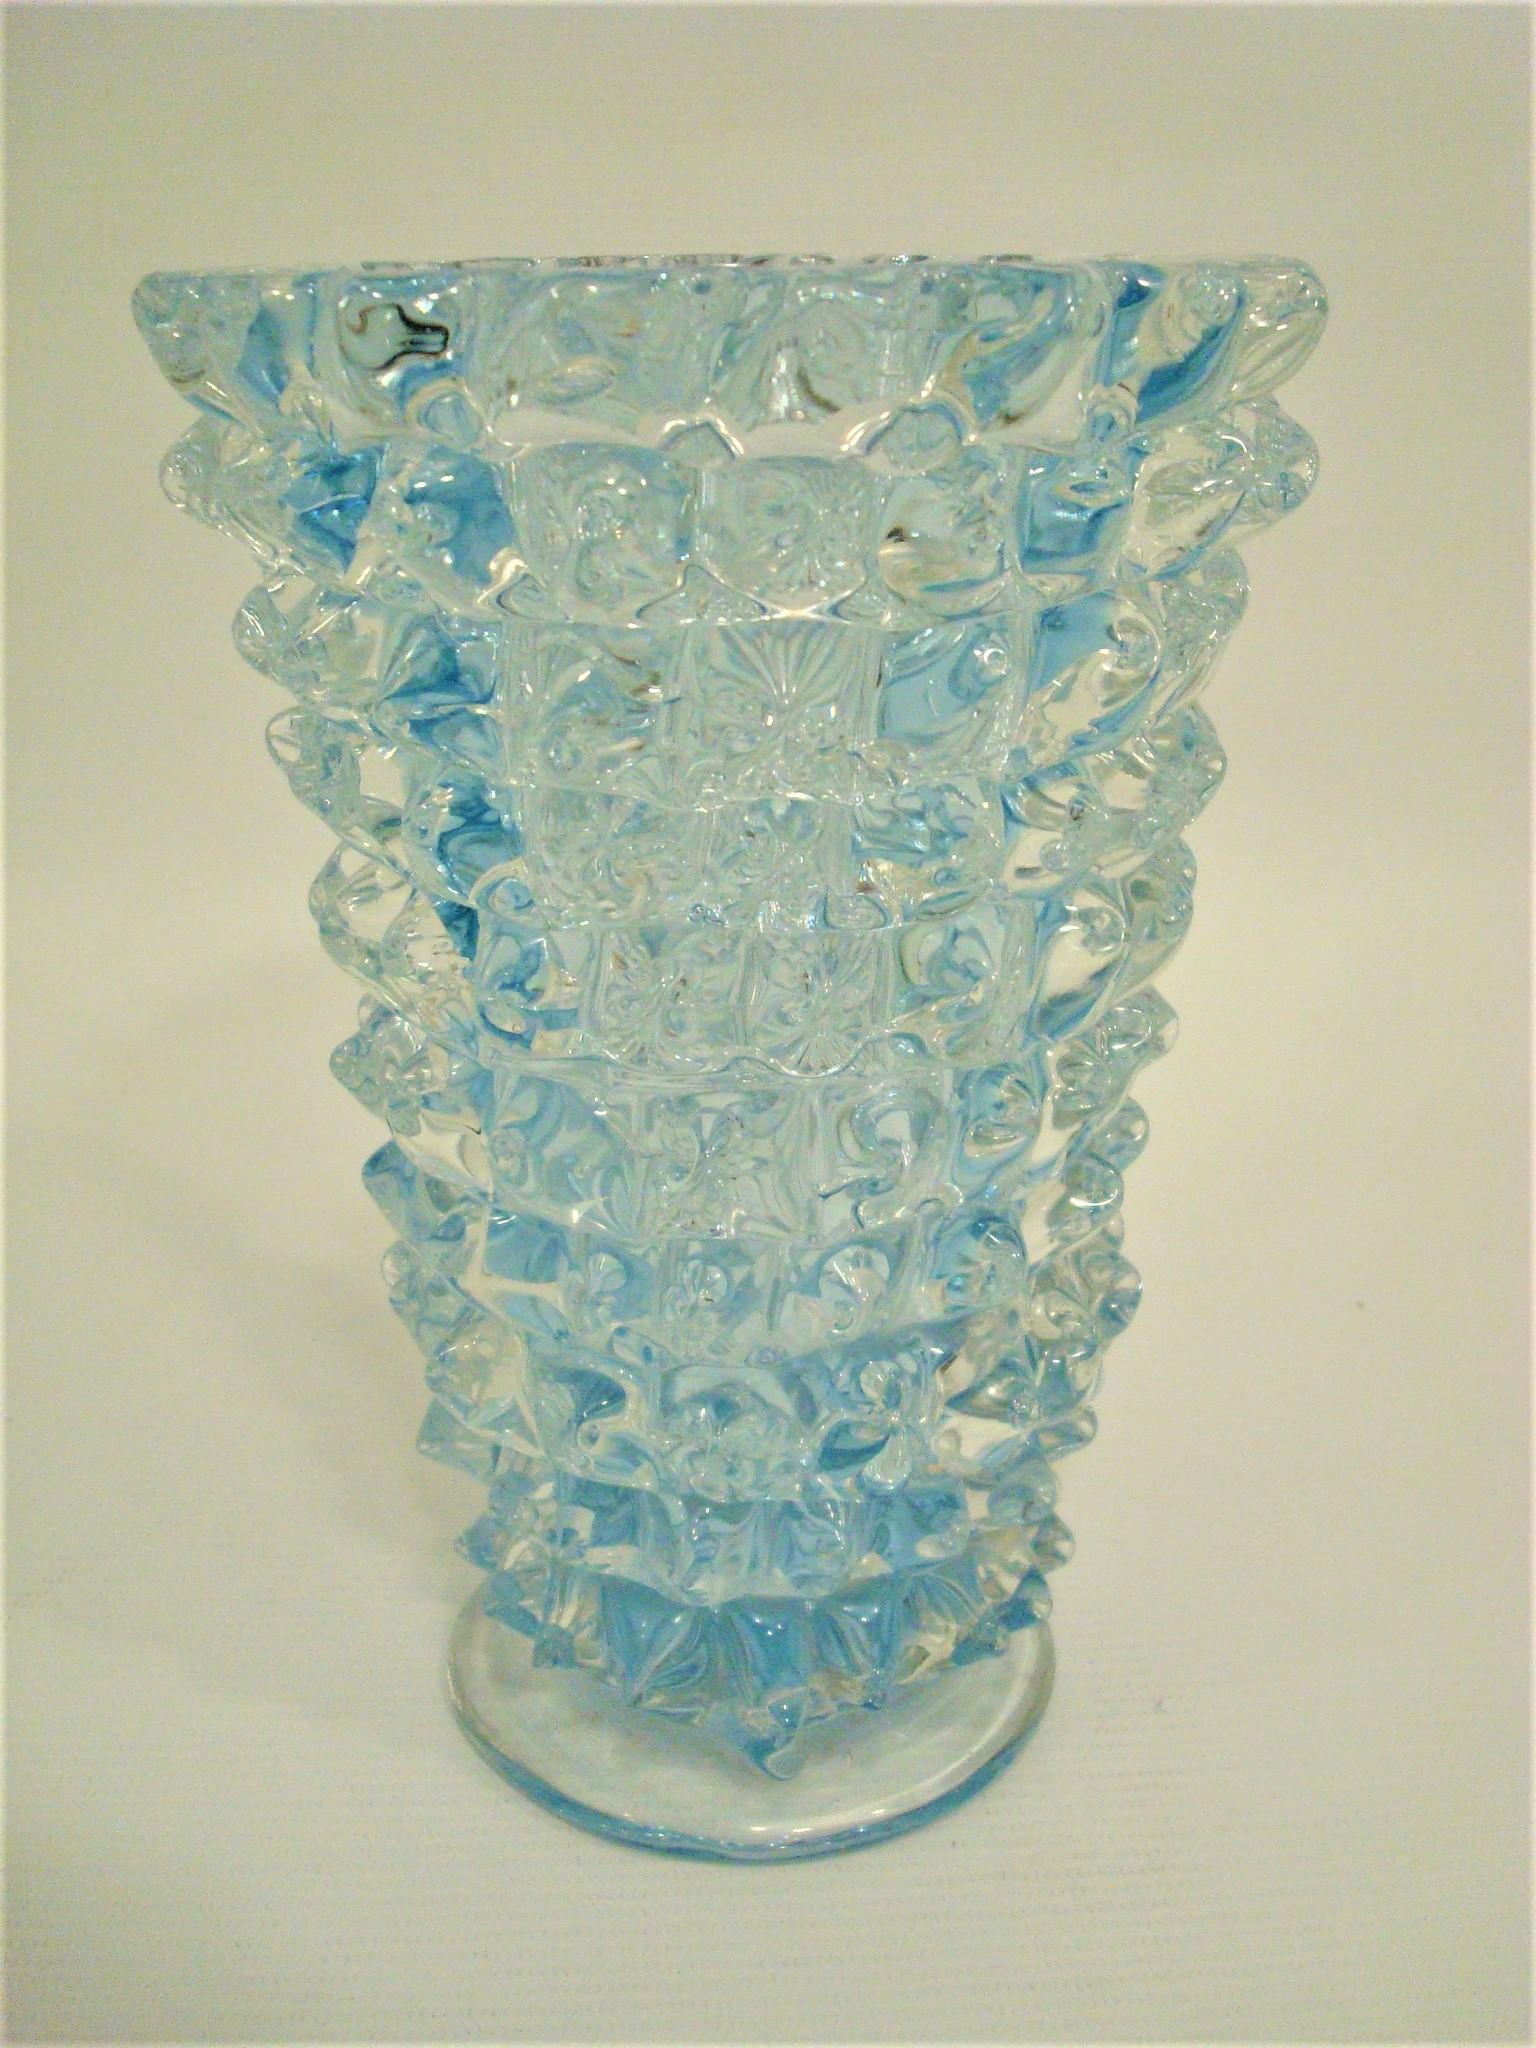 Barovier & Toso Murano Clear and light blue Rostrato glass vase, Italy, 1950s
Vintage / mid-century / Art Deco Blue Murano art glass vase made with rostrato technique by Ercole Barovier for Barovier e Toso.
This piece, unusual in this clear light